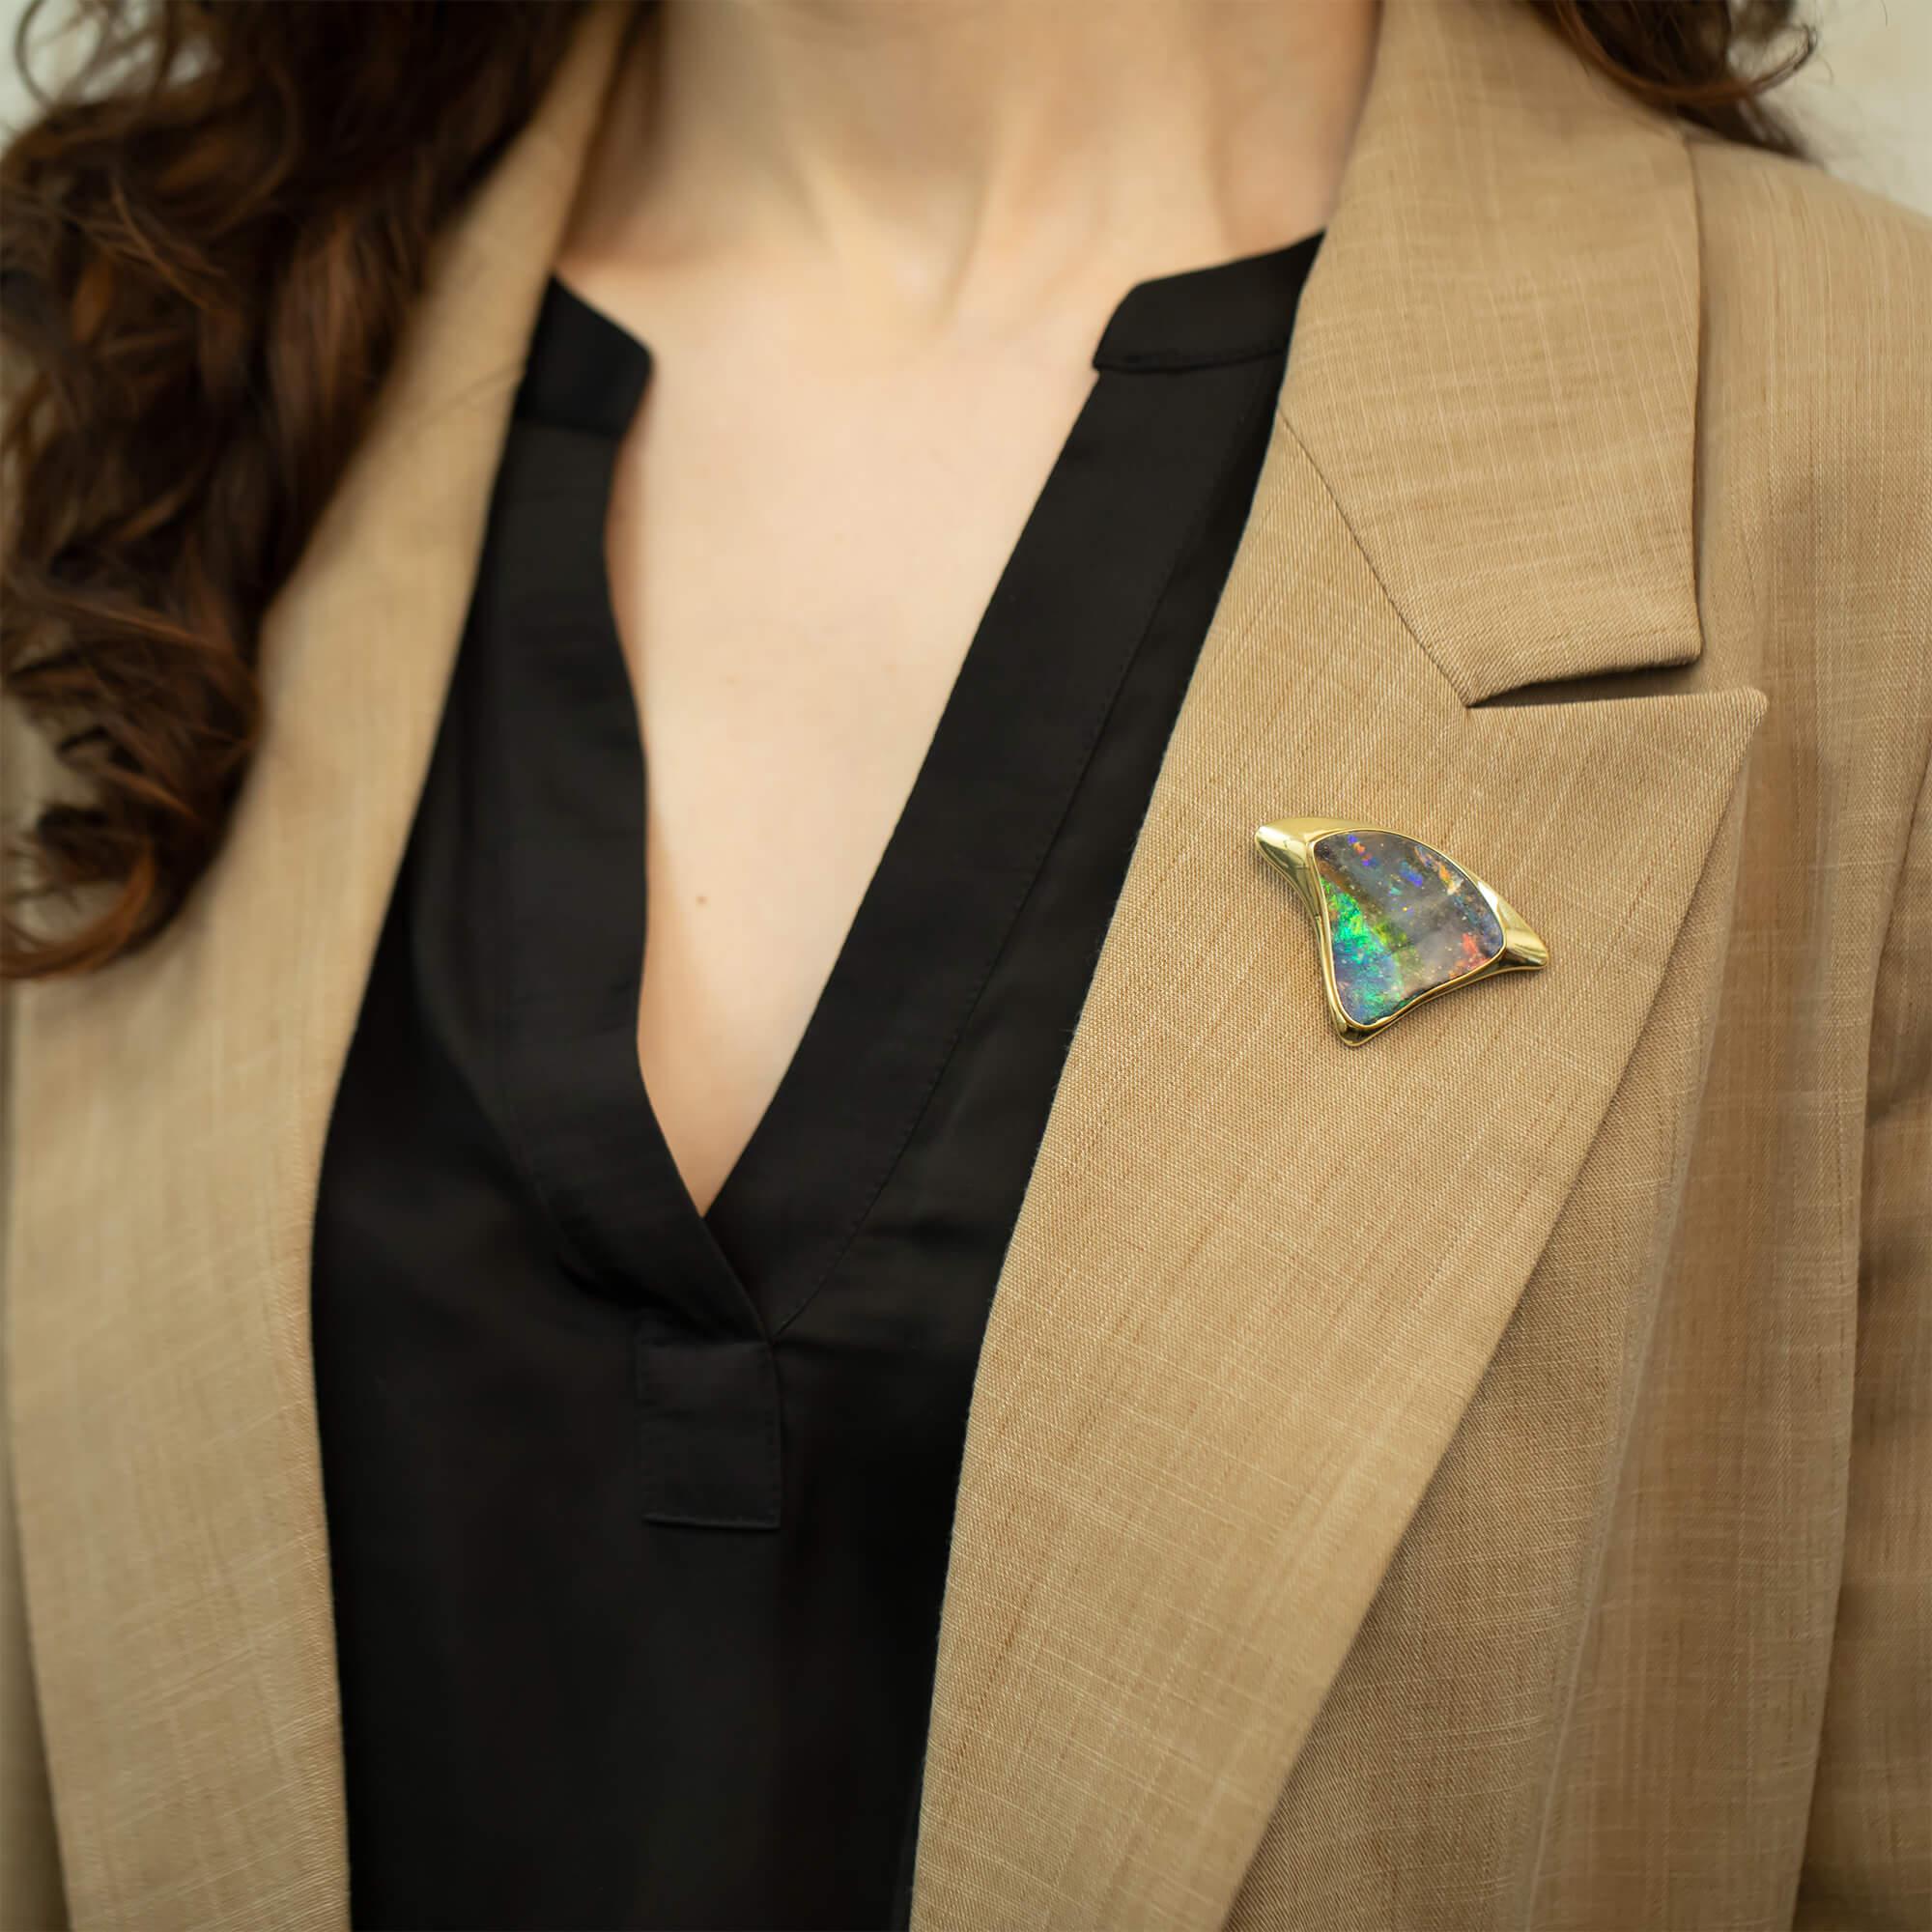 This unique, spectacular triangular brooch is set with one freeform solid Queensland boulder opal flat cabochon with two distinct bands of colour representing the nights sky and the sea. The opal is surrounded by a yellow gold custom mounting